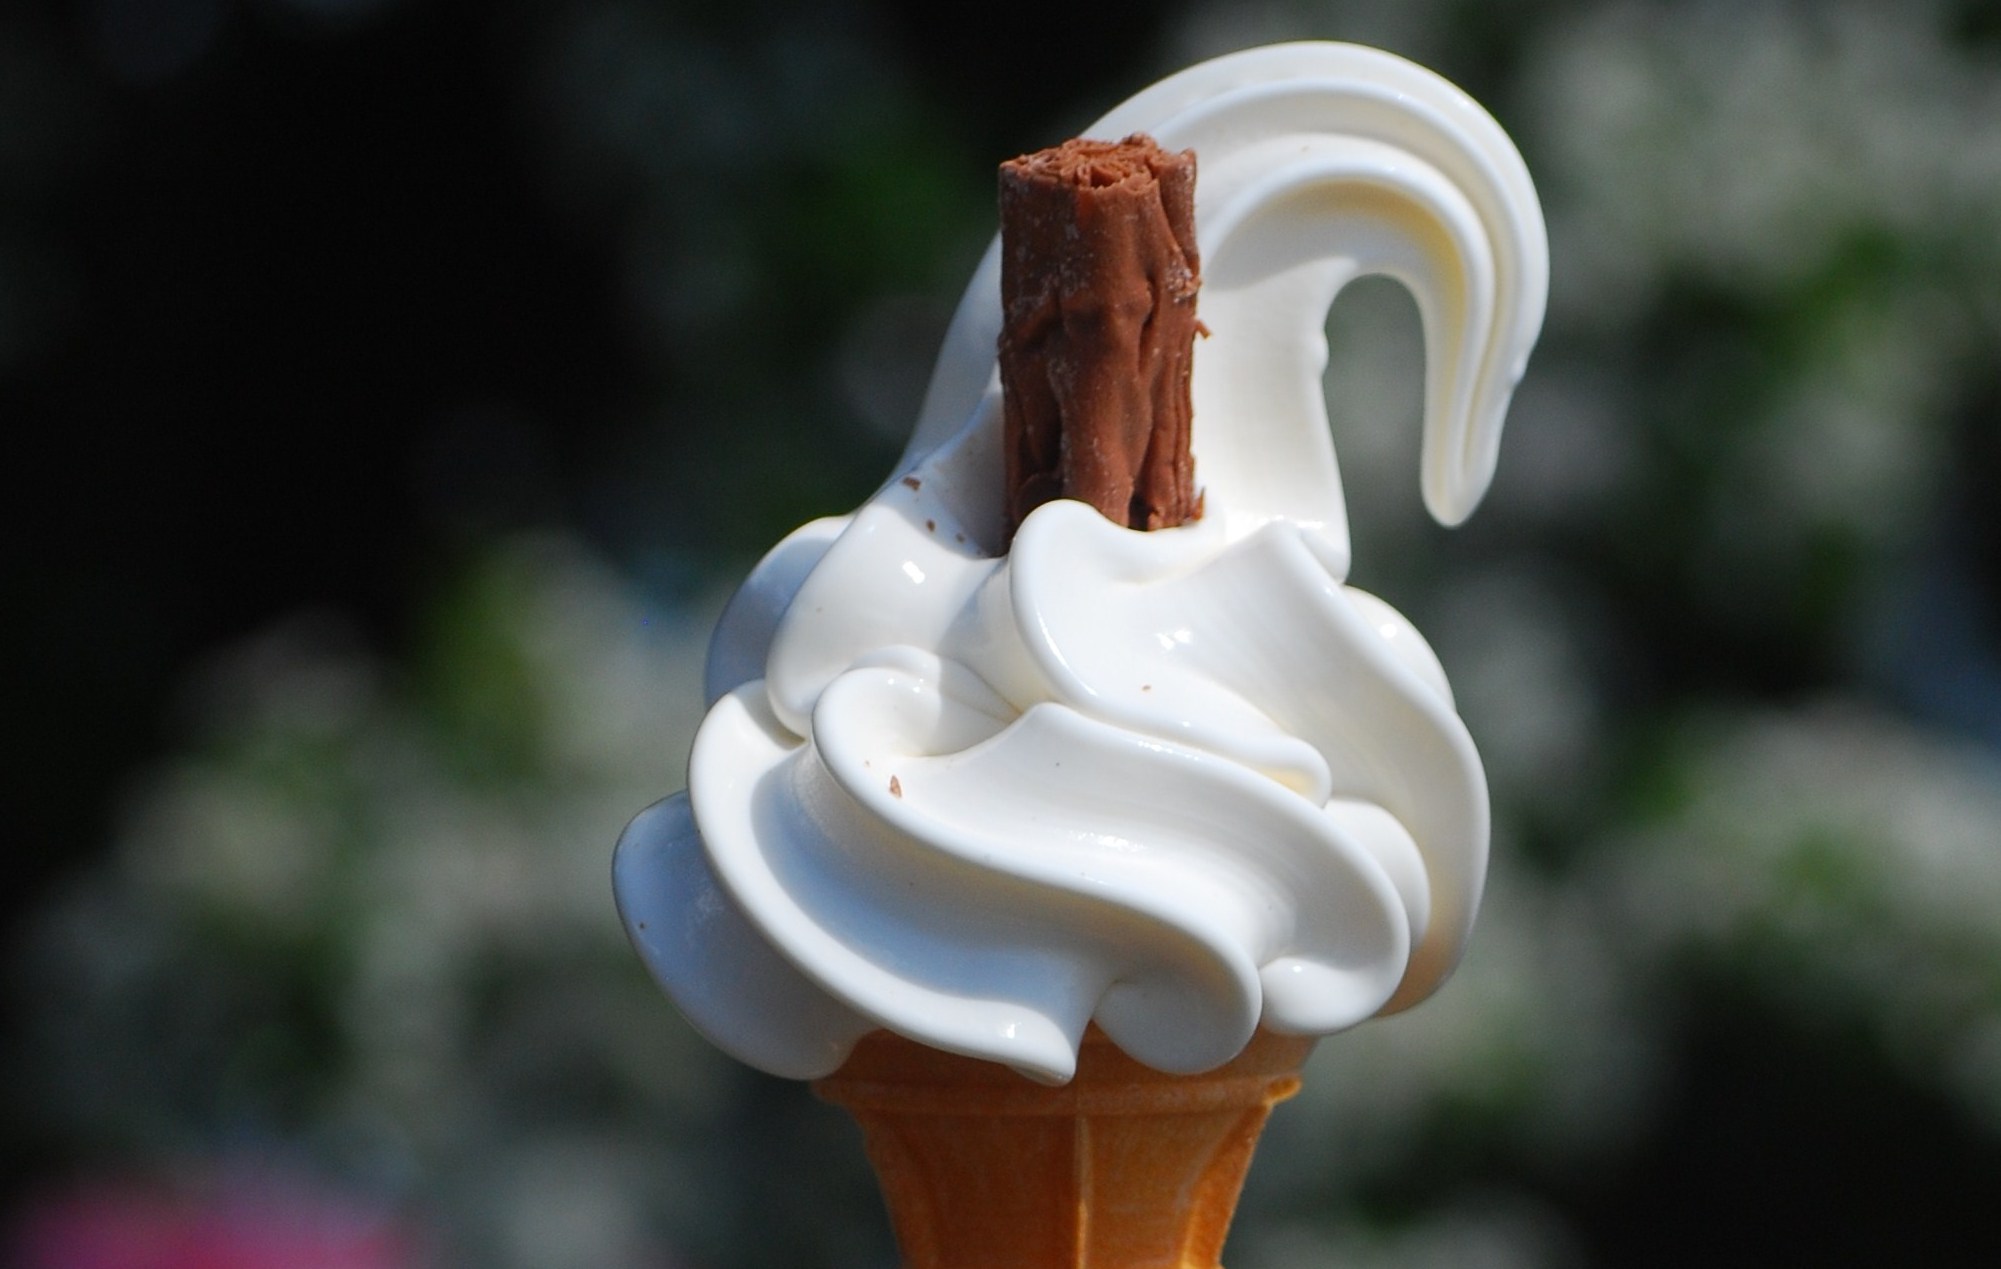 A 99 Flake ice cream, consisting of vanilla soft serve with a half-size chocolate flake stuck in it